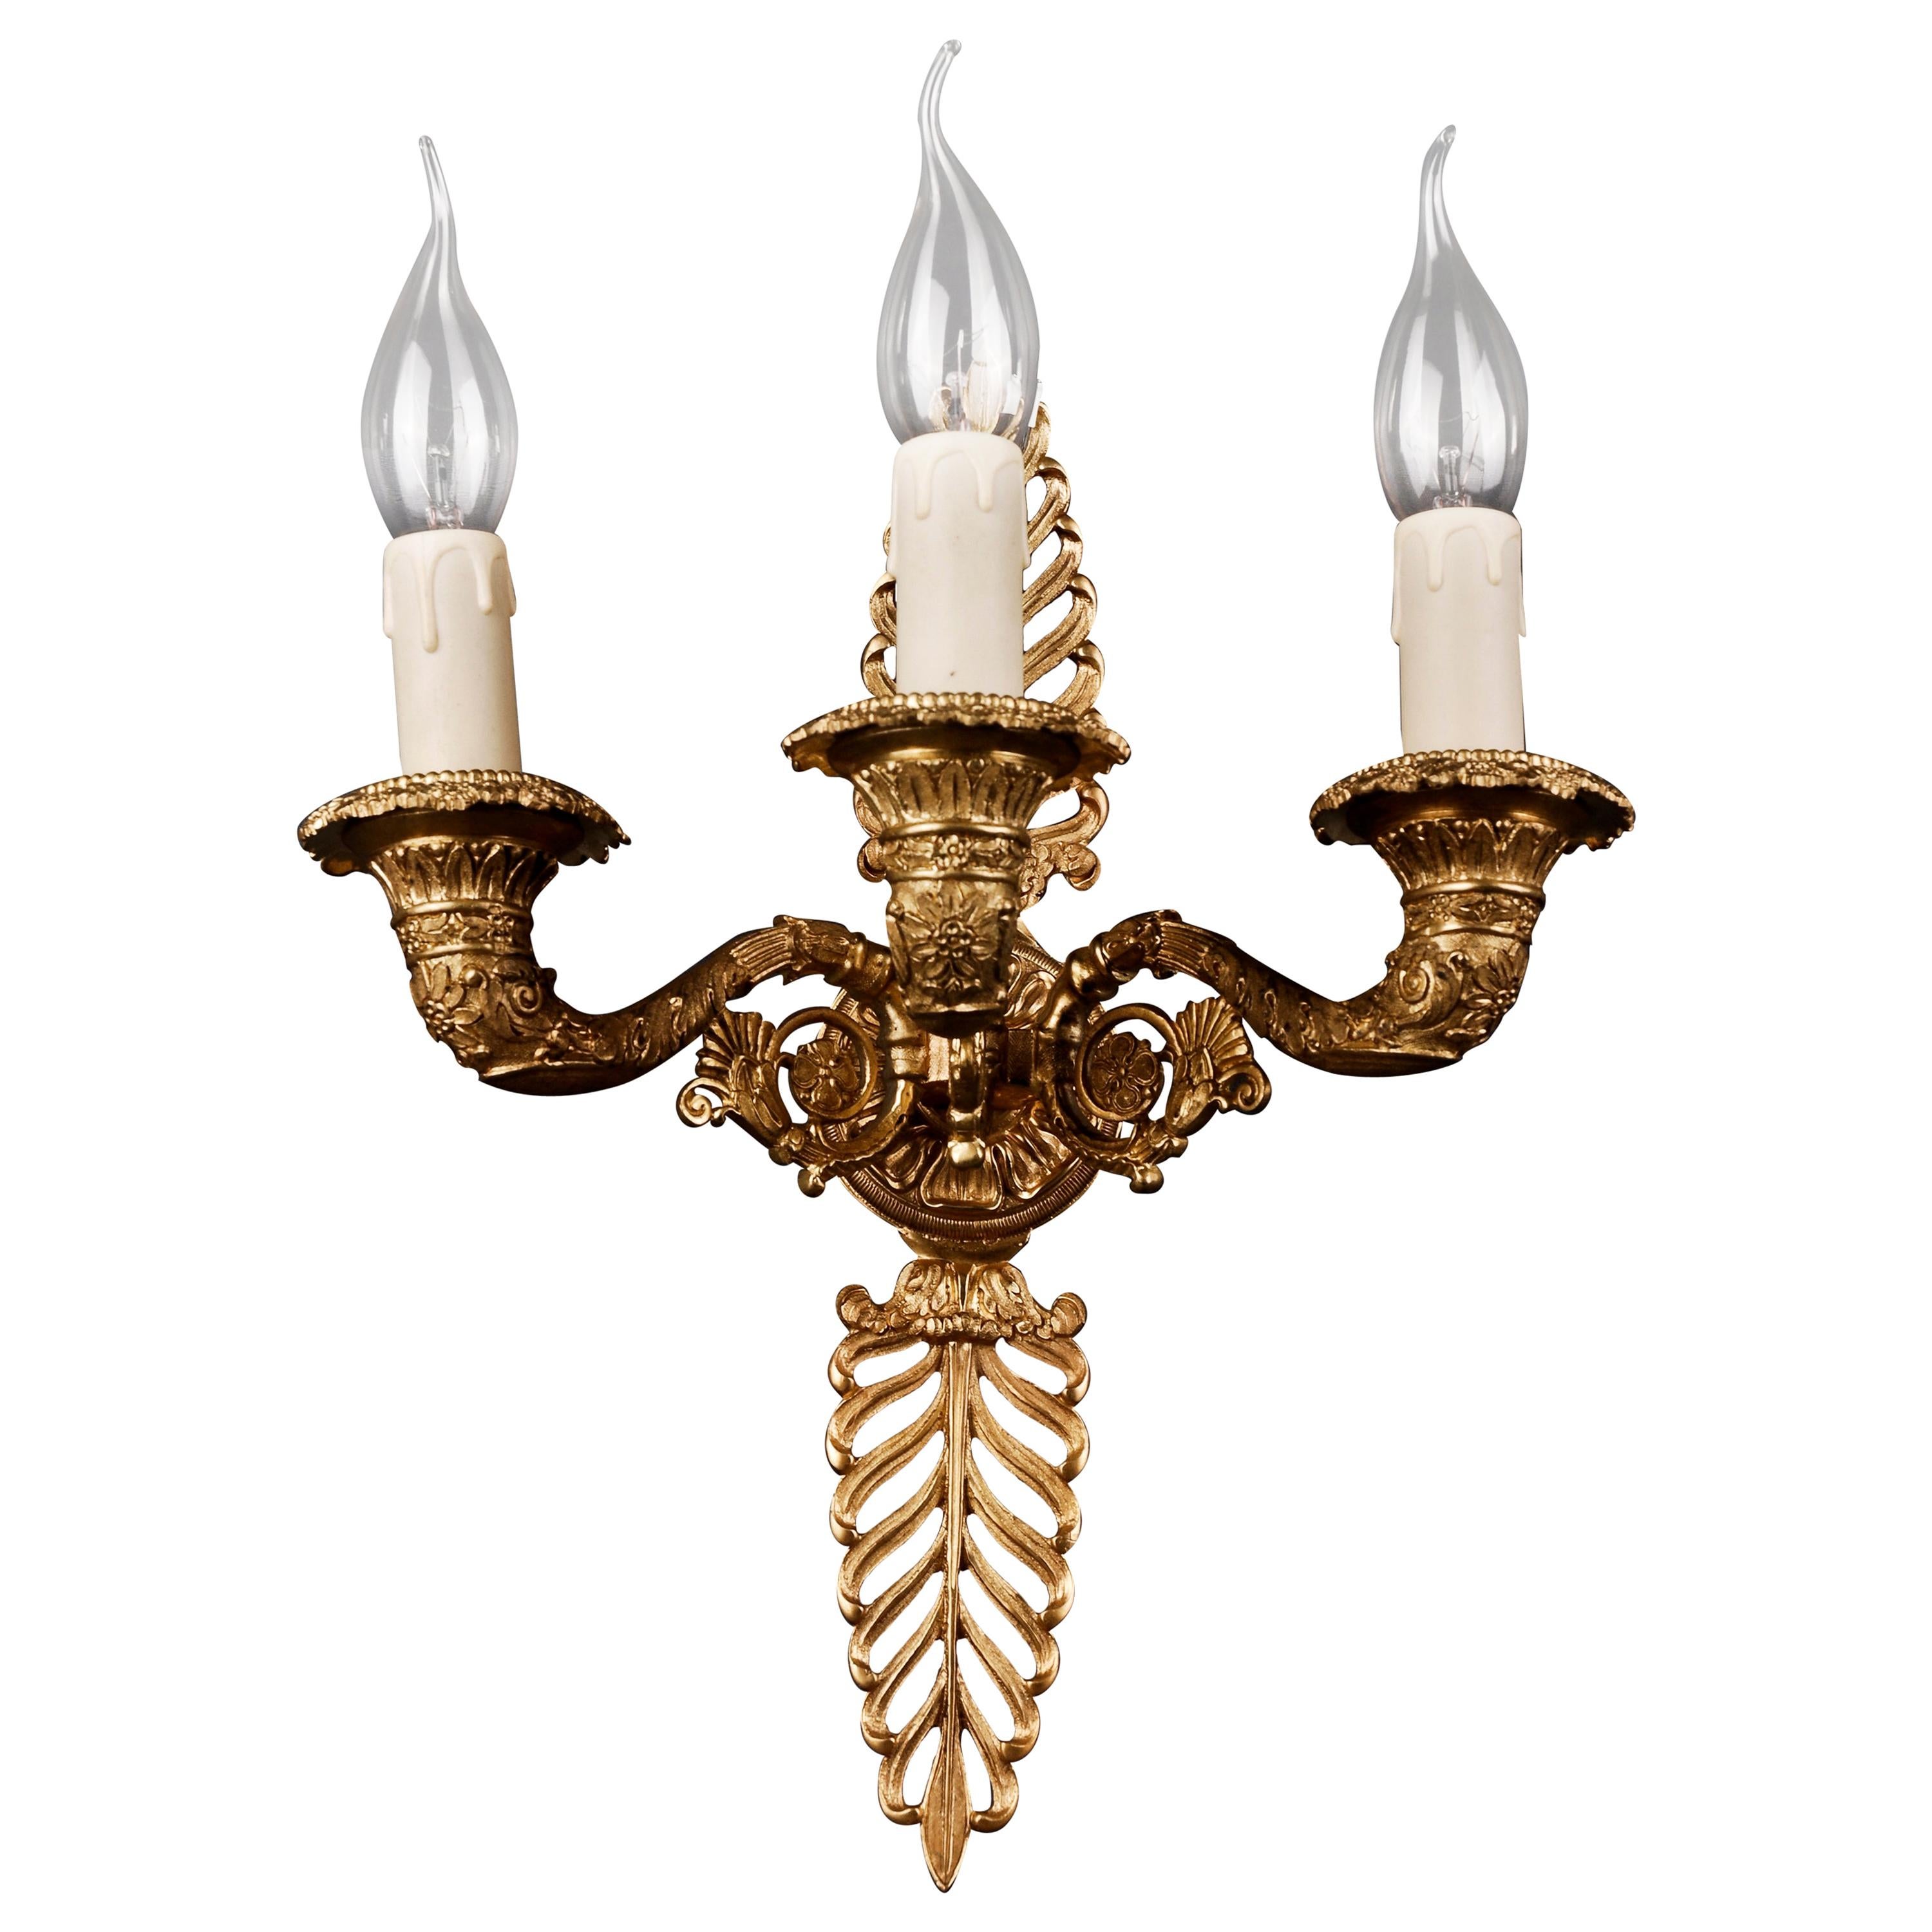 20th Century Empire Style Wall Light Lamp For Sale